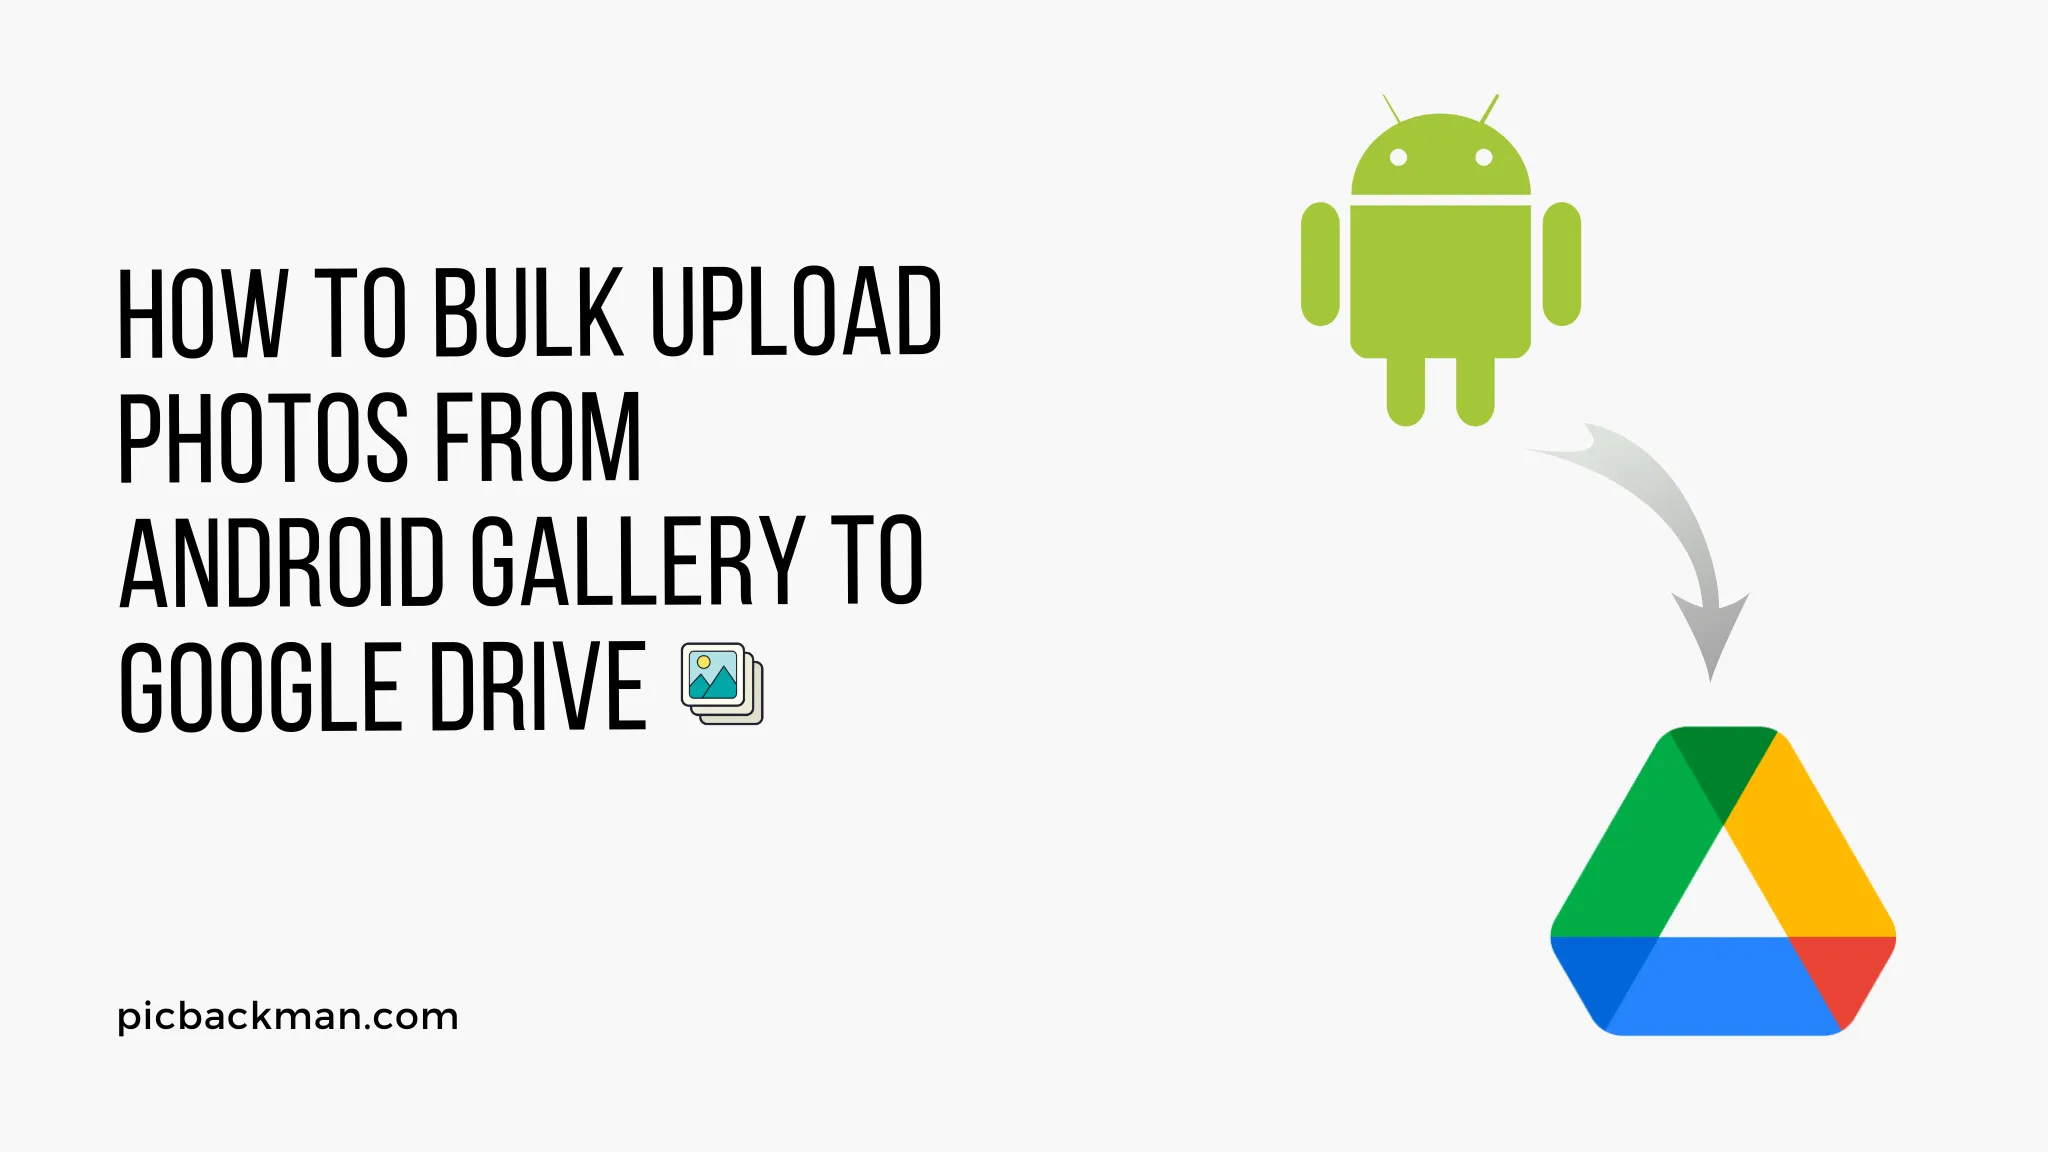 How to Bulk Upload Photos from Android Gallery to Google Drive